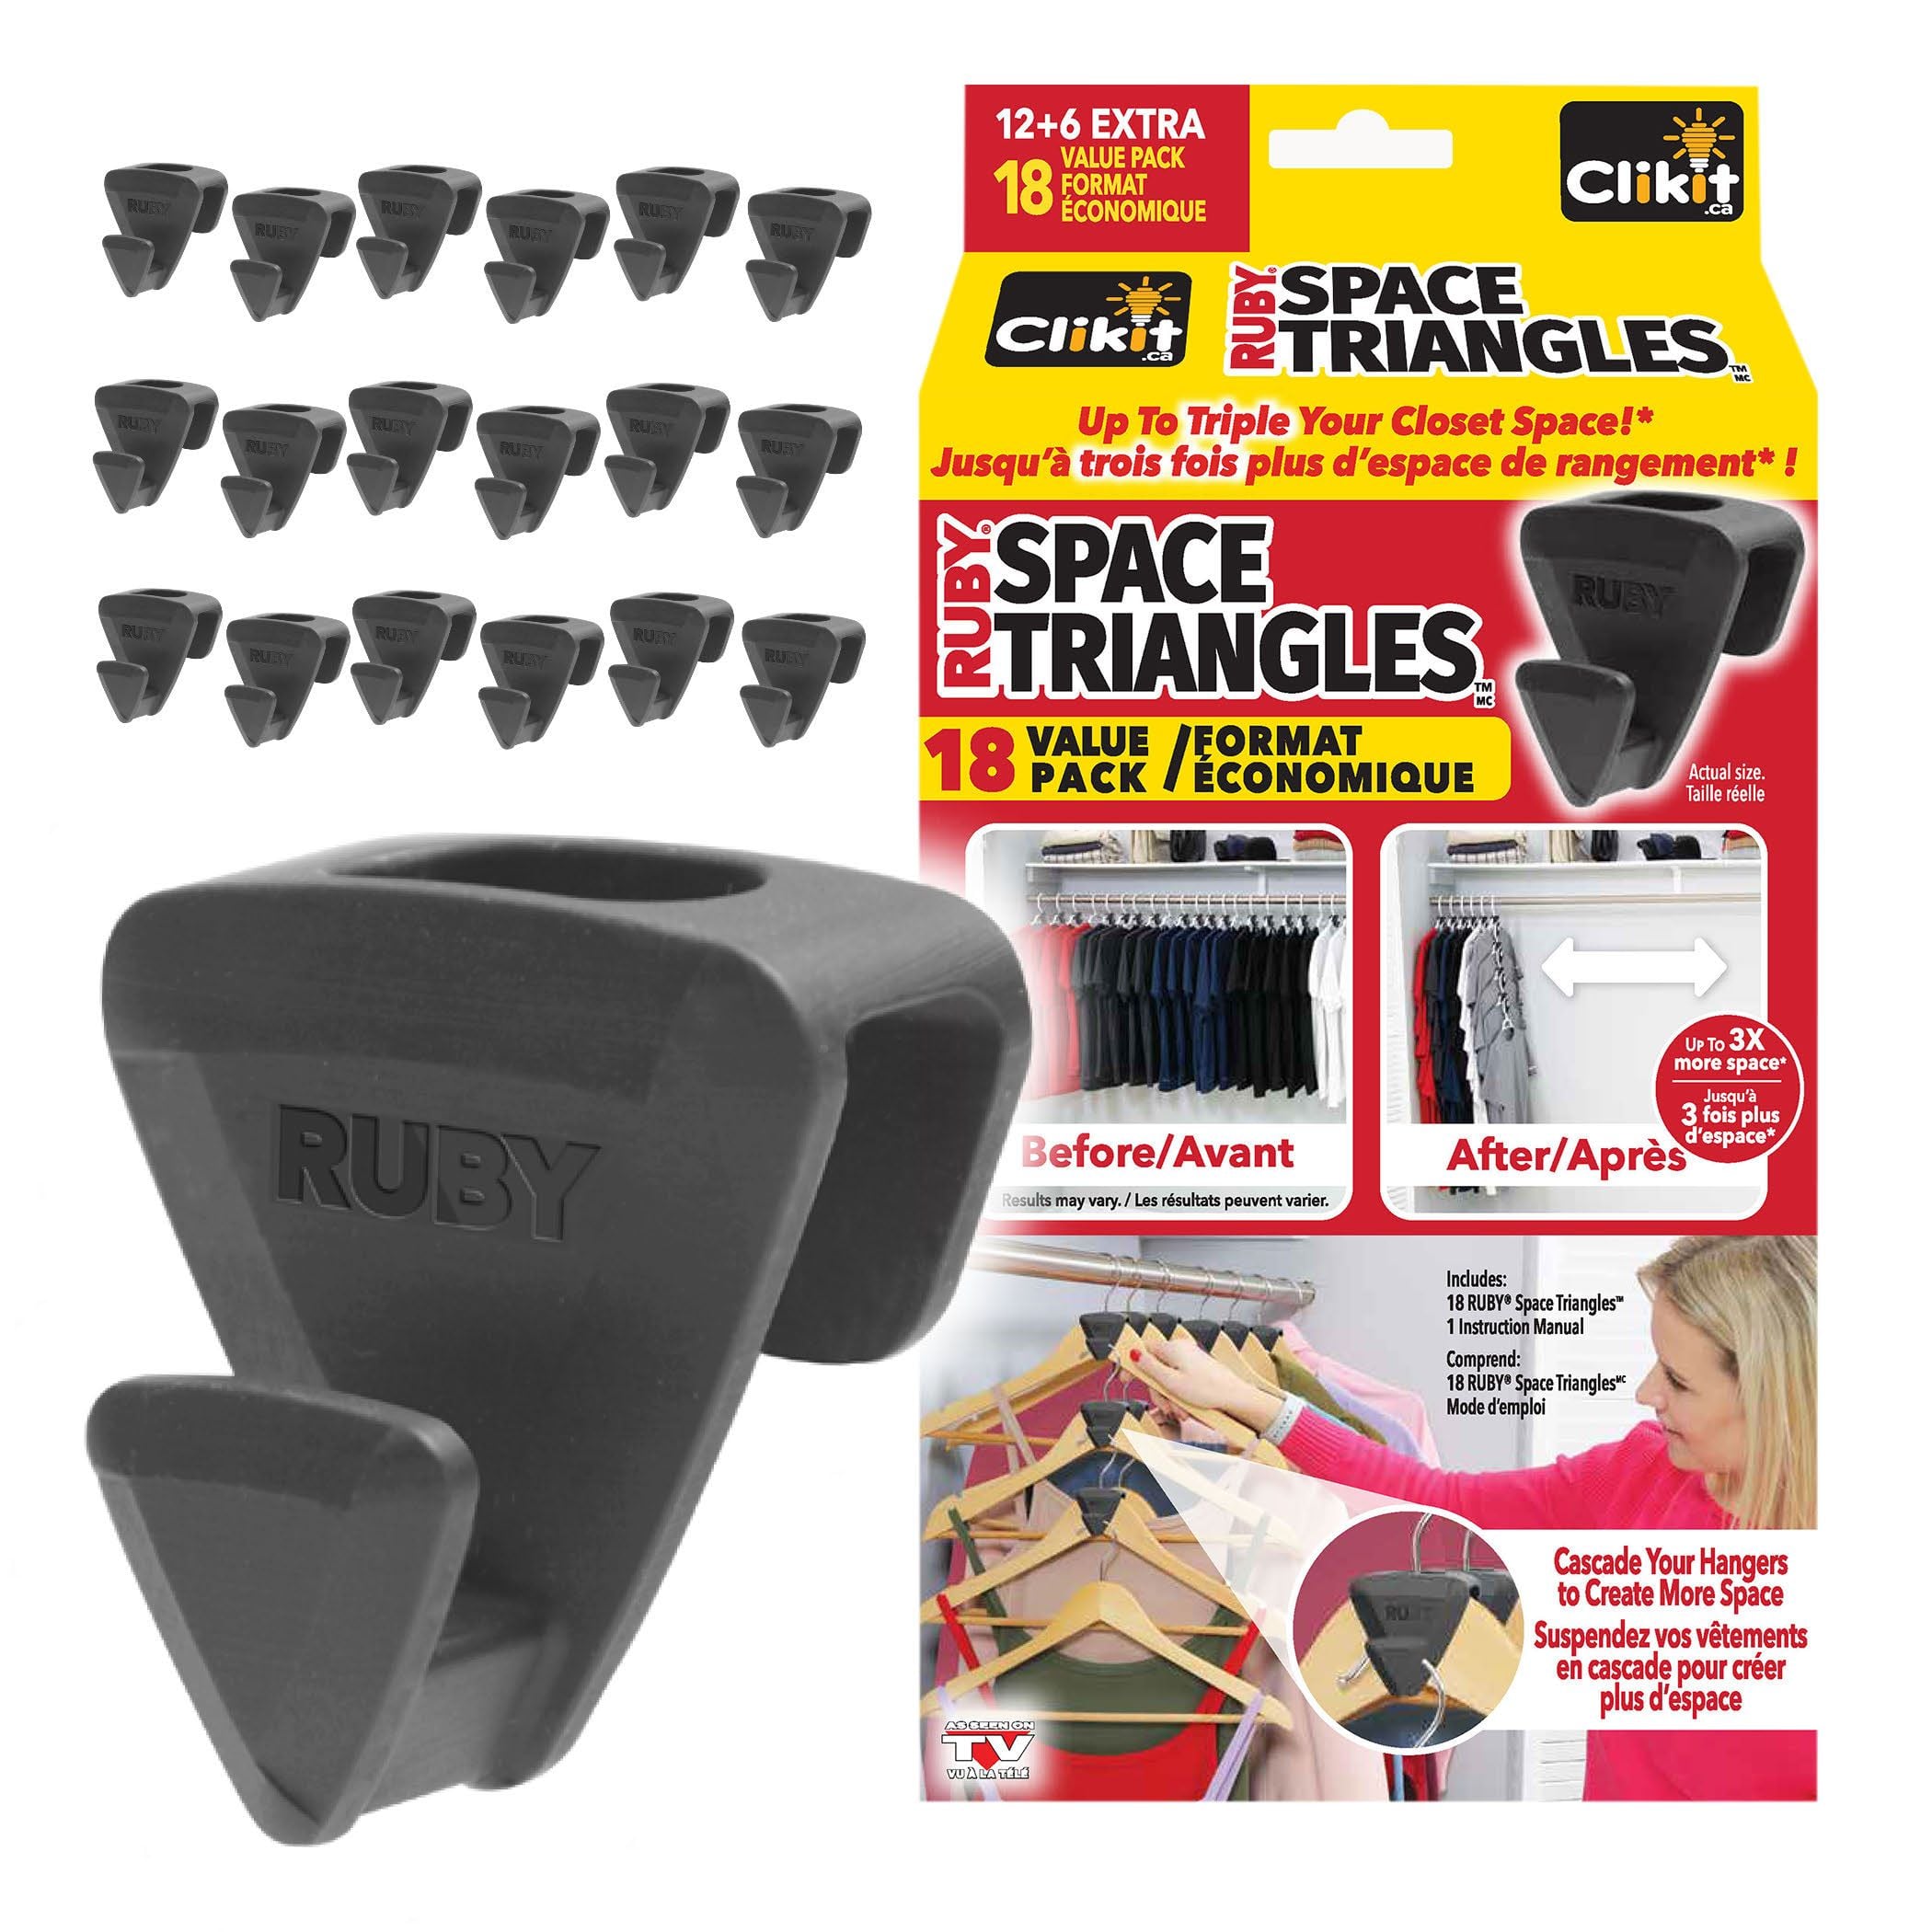 https://media-www.canadiantire.ca/product/living/as-seen-on-tv/asotv/4991420/ruby-space-triangles-be37e0ea-0c7c-4d9d-bf63-6f1b95aef5fd-jpgrendition.jpg